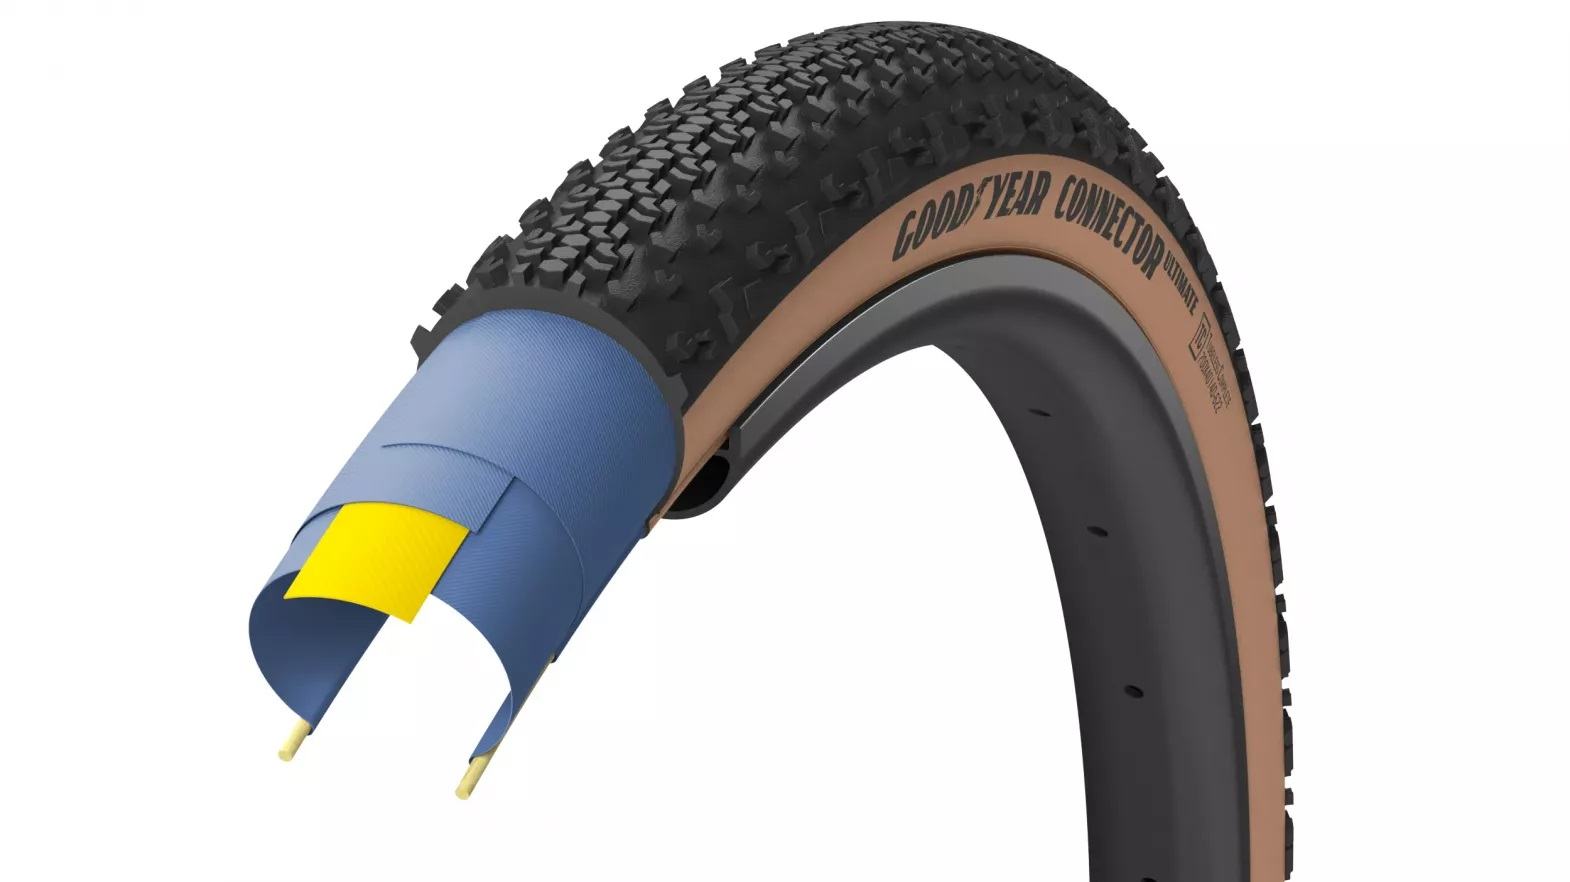 Покришка 700x40 GoodYear CONNECTOR tubeless complete, folding, black/tan, 120tpi